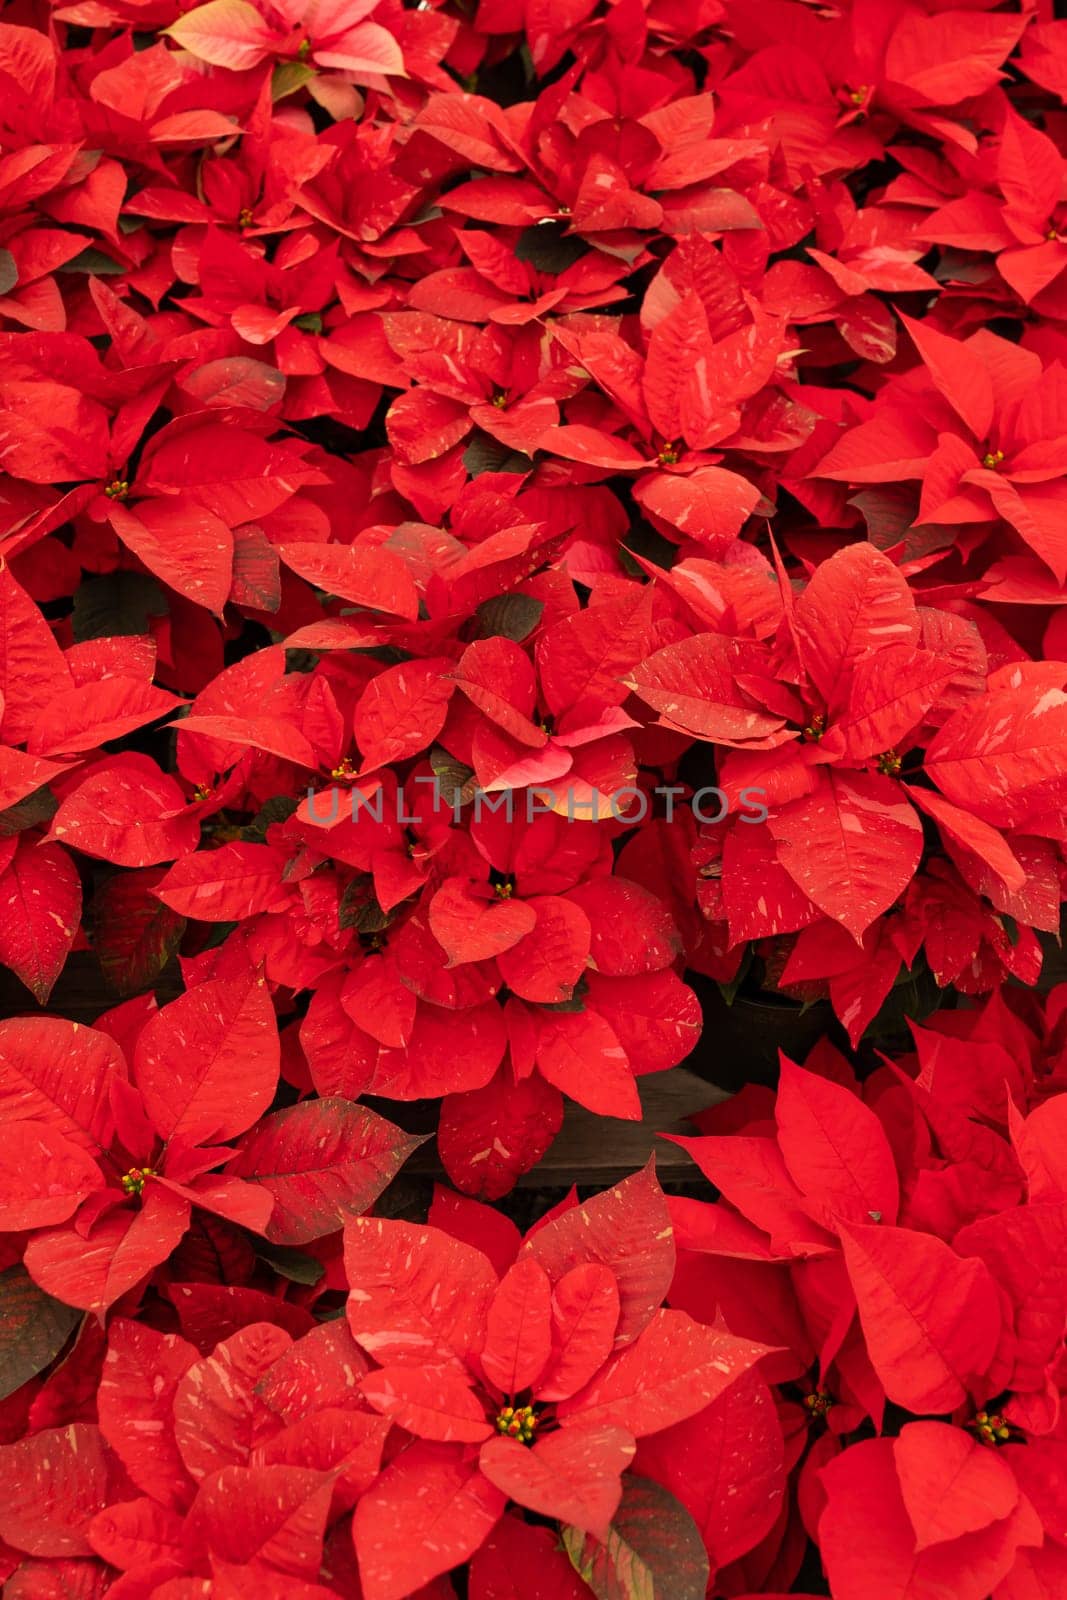 Many Red Freedom Jingle Bells Poinsettia Flower, With Star-shaped Red Leaves, Christmas Eve Flower, Flor De Nochebuena. Tropical Shrub. Horizontal Plane, Closeup. National Poinsettia Day Celebration